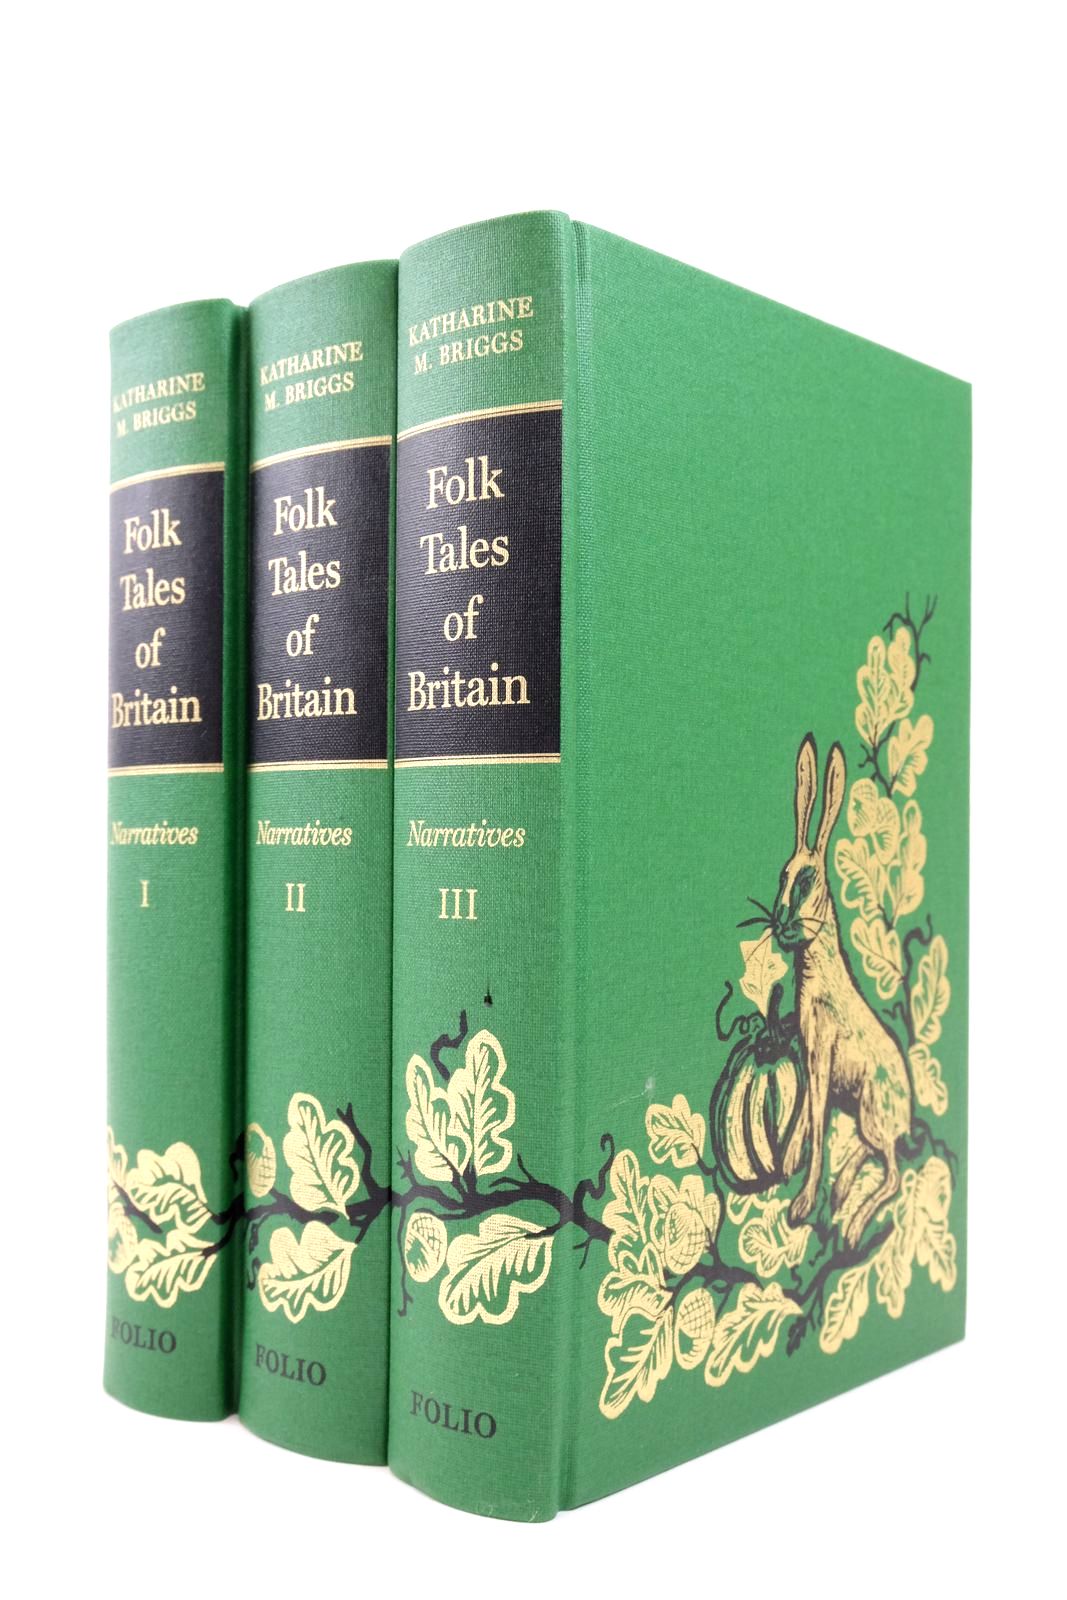 Photo of FOLK TALES OF BRITAIN NARRATIVES (3 VOLUMES) written by Briggs, Katharine M. illustrated by Firmin, Hannah
Firmin, Peter
Melinsky, Clare published by Folio Society (STOCK CODE: 2137768)  for sale by Stella & Rose's Books